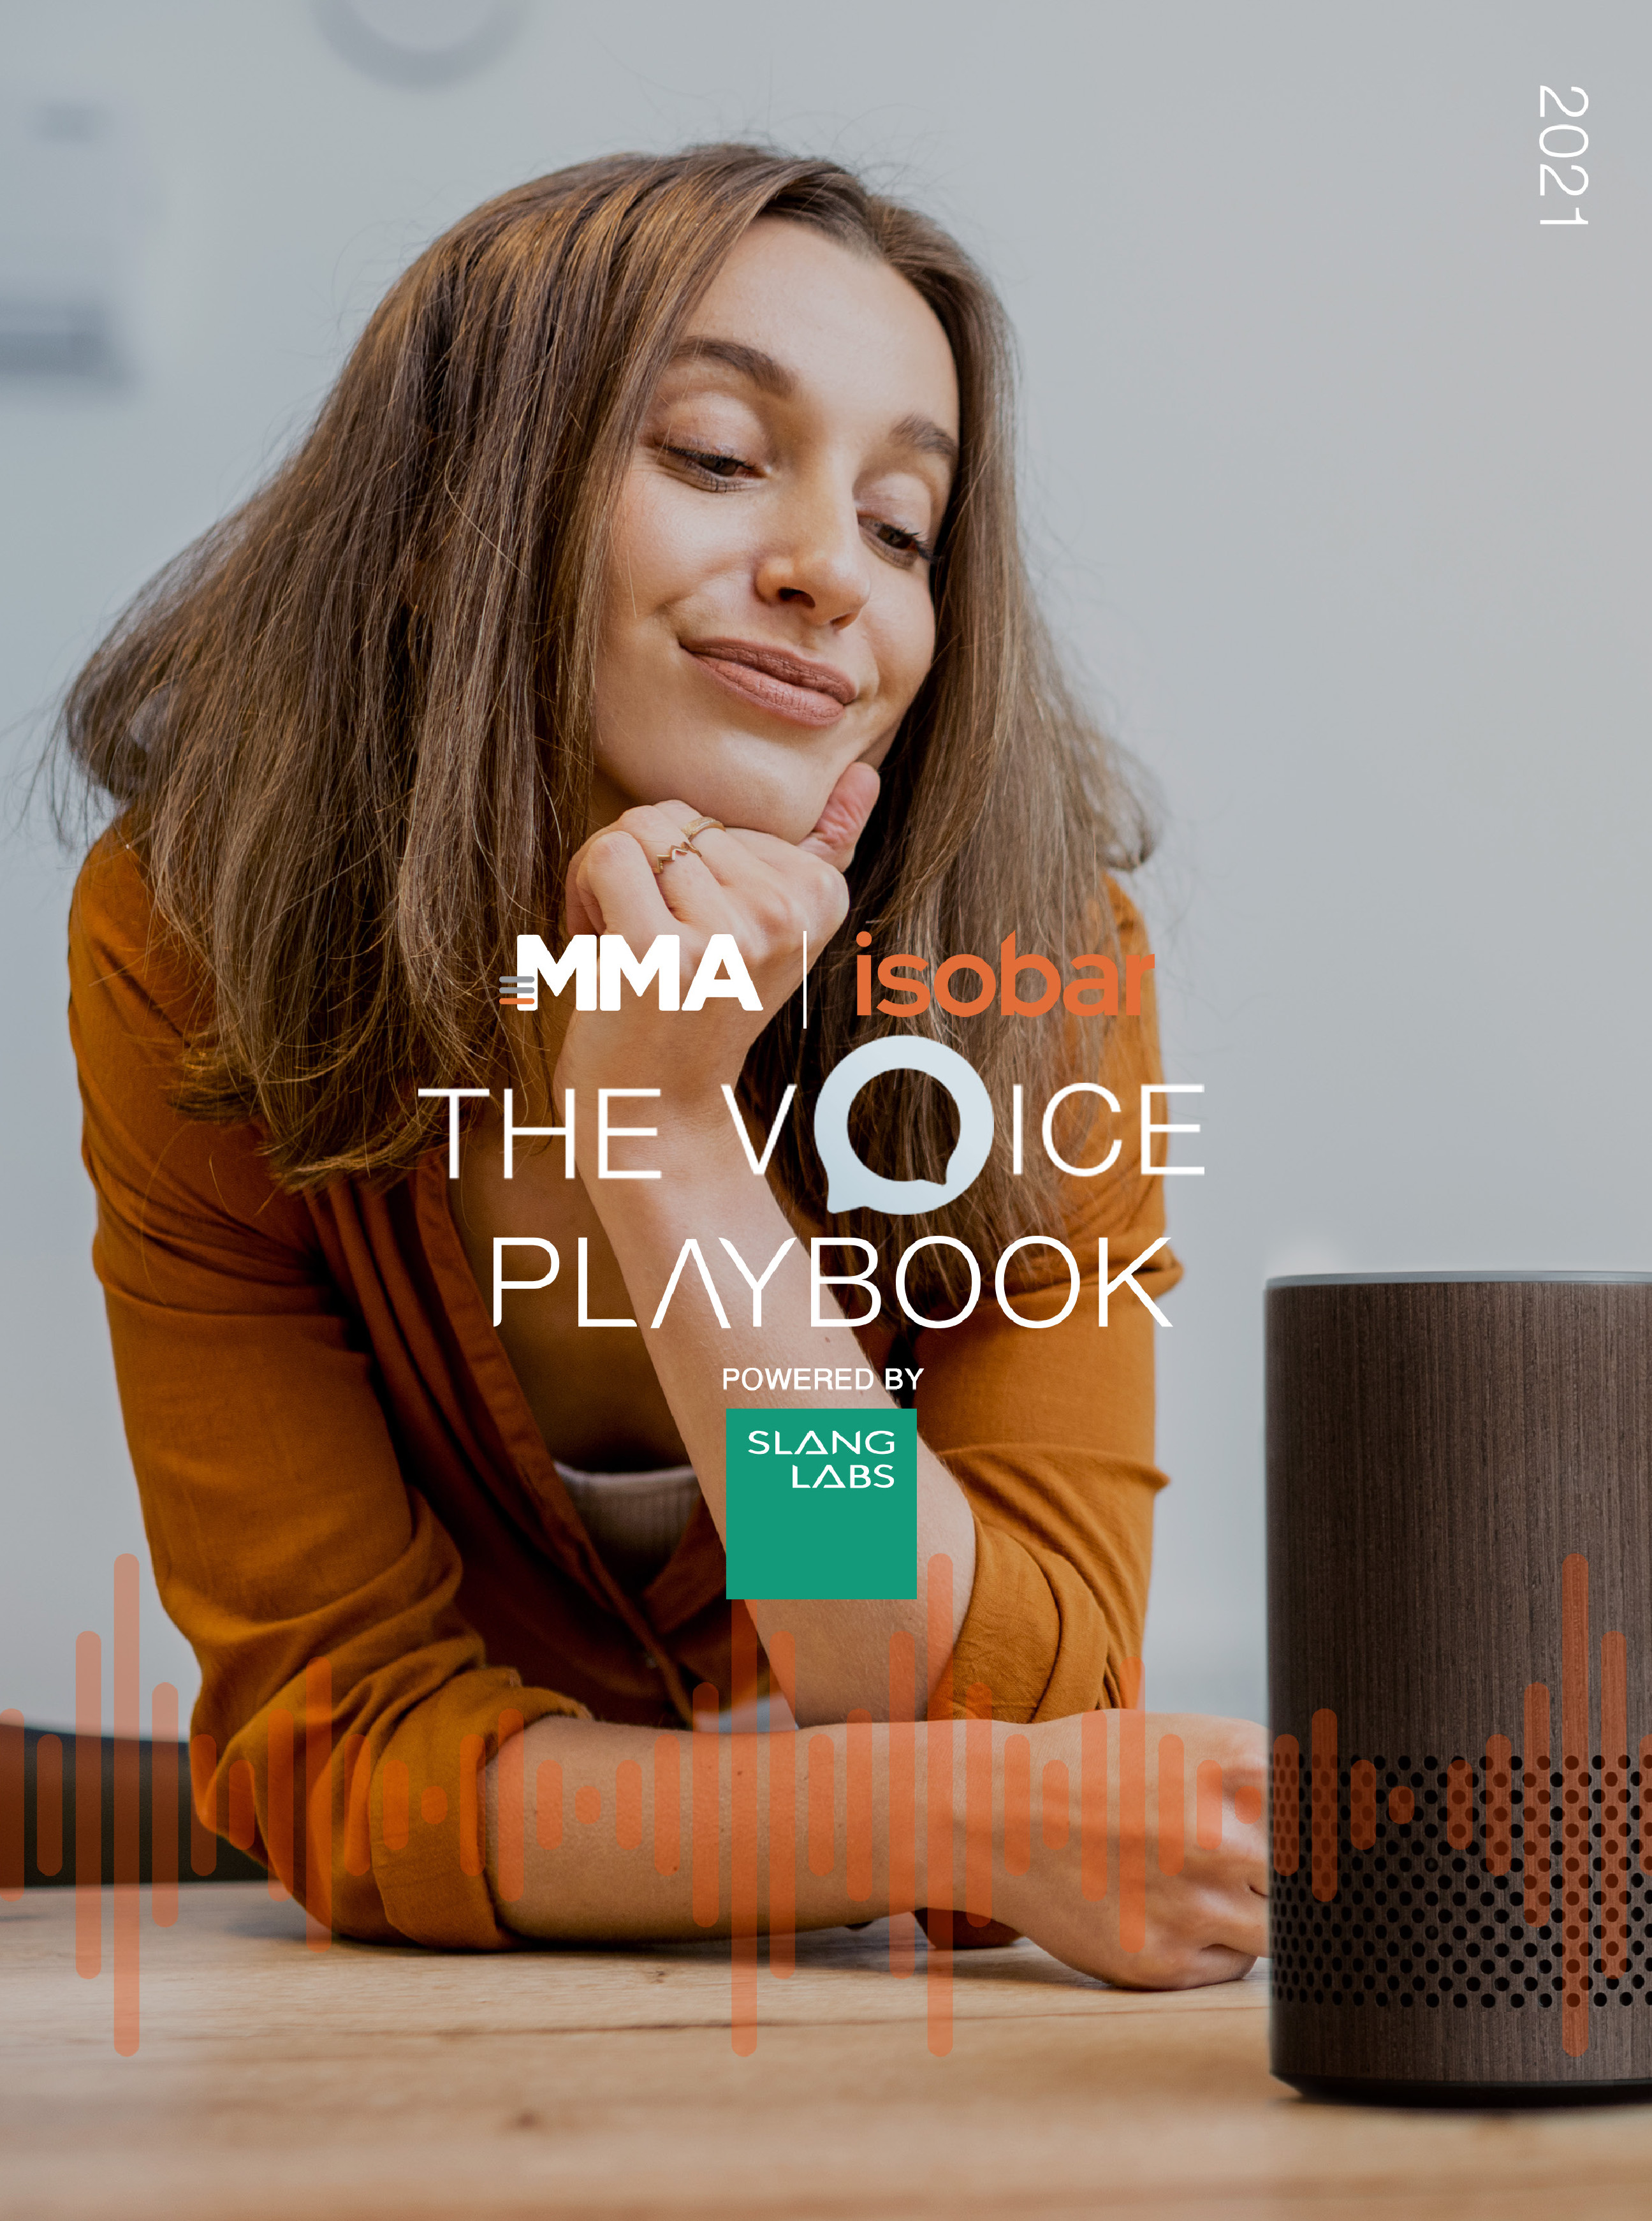 The Voice Playbook 2021 Powered by Slang Labs